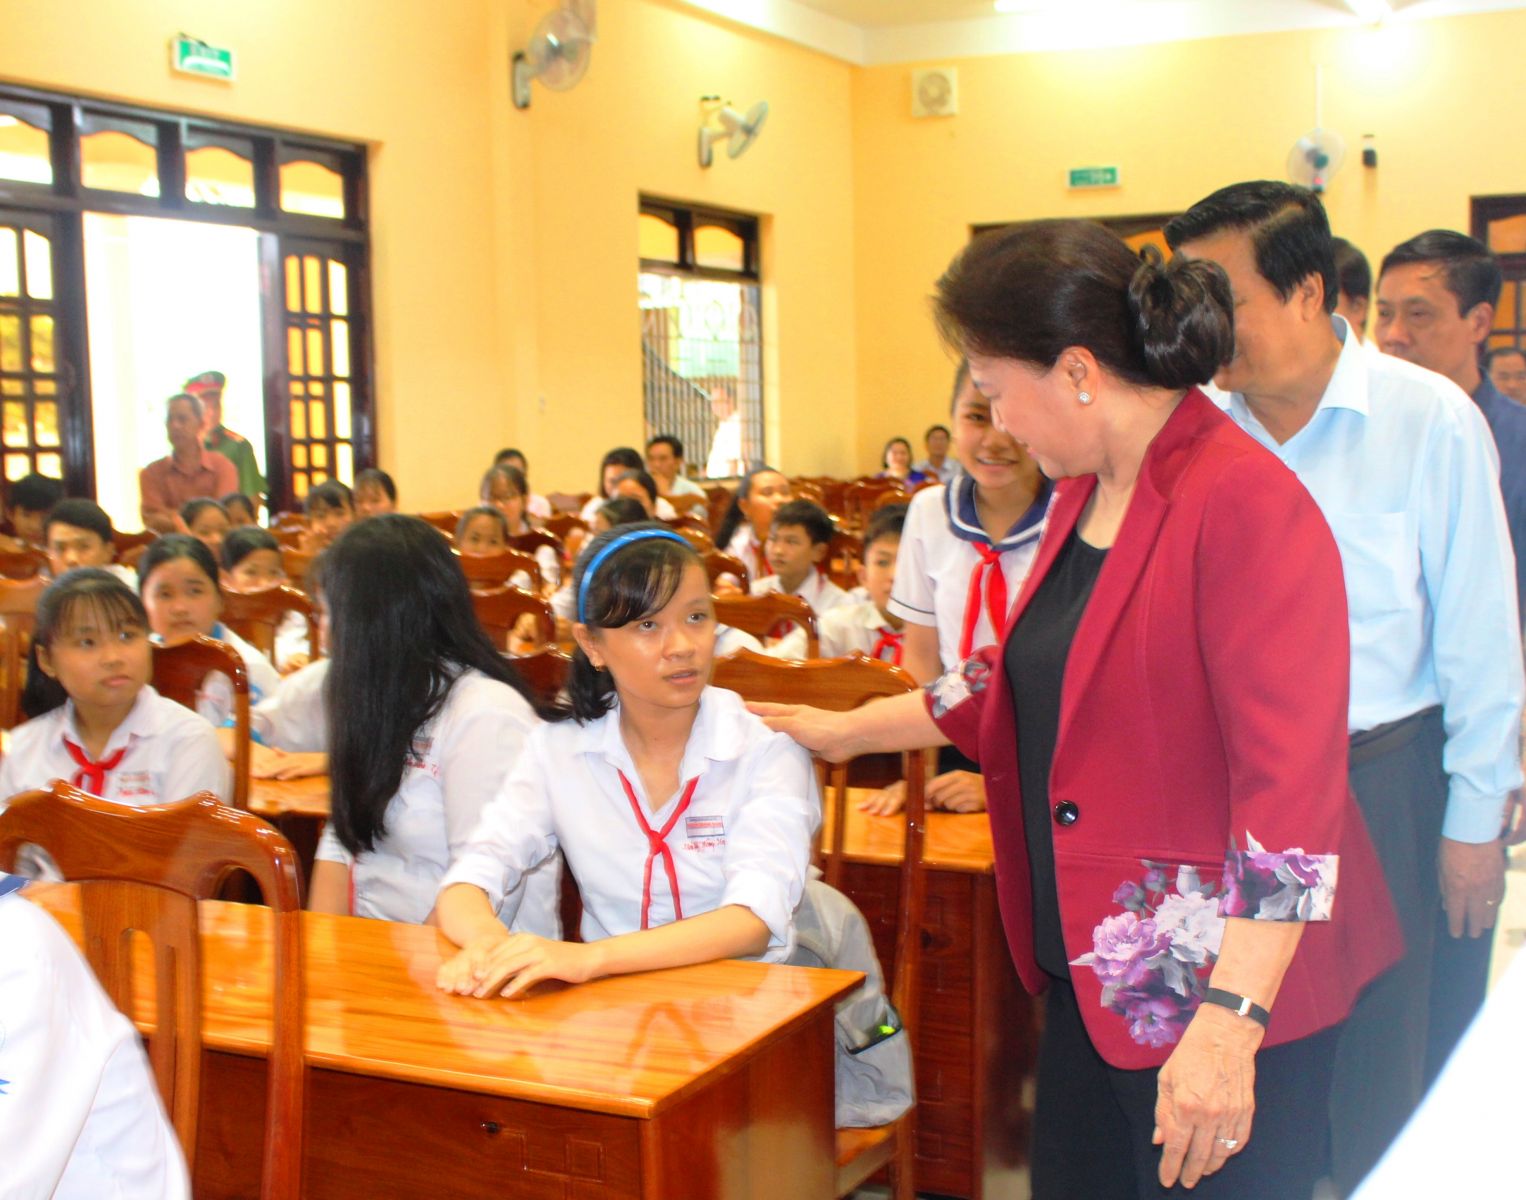 NA Chairwoman - Nguyen Thi Kim Ngan encourages the children to continue their study